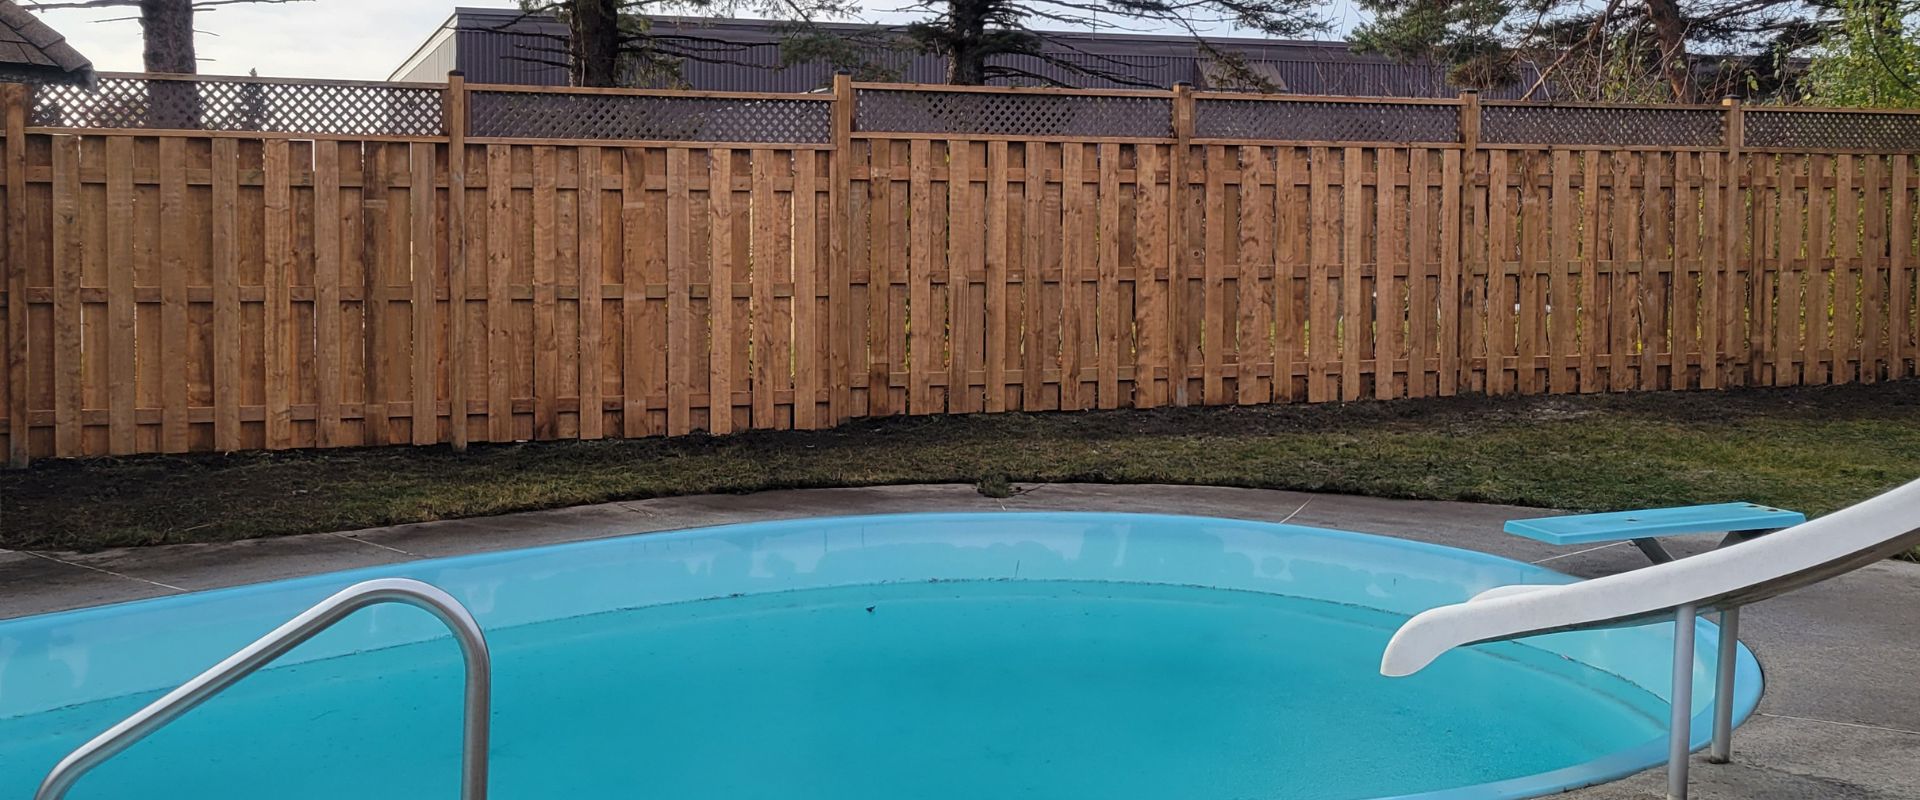 Pressure Treated Fence With Lattice Surrounding a Pool in Ottawa